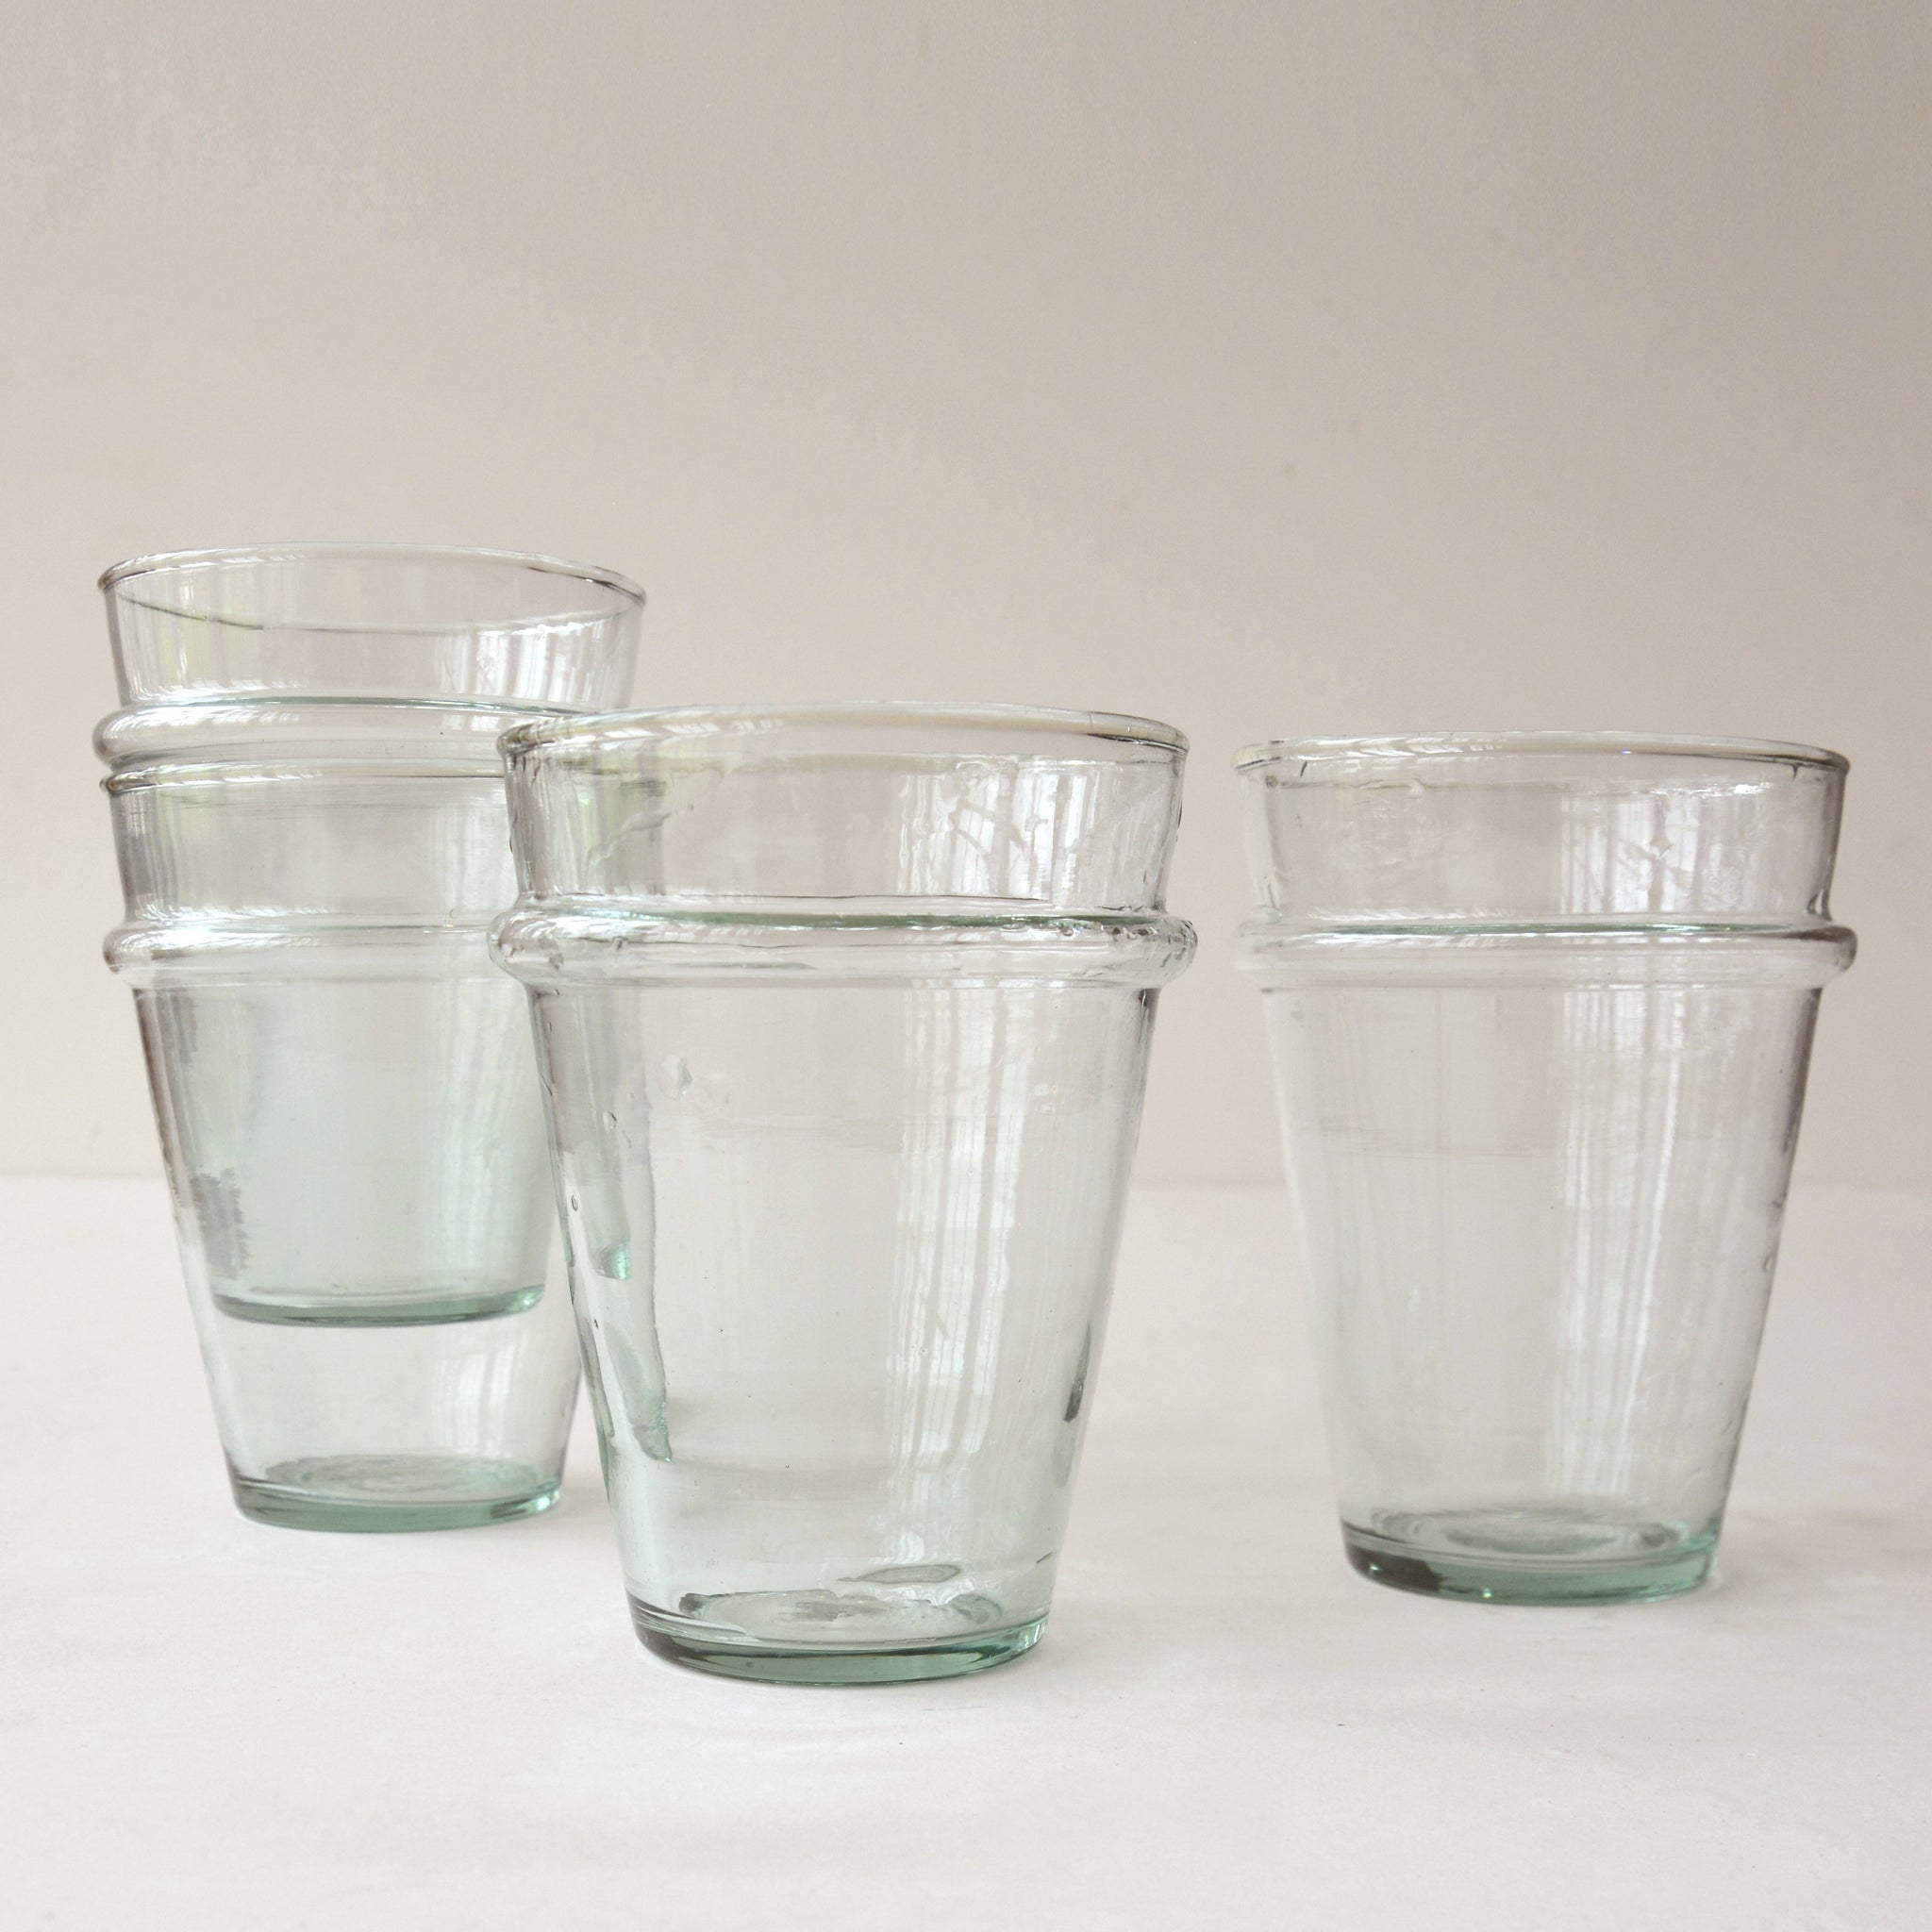 Tomber Stacking Glass (Set of 4)